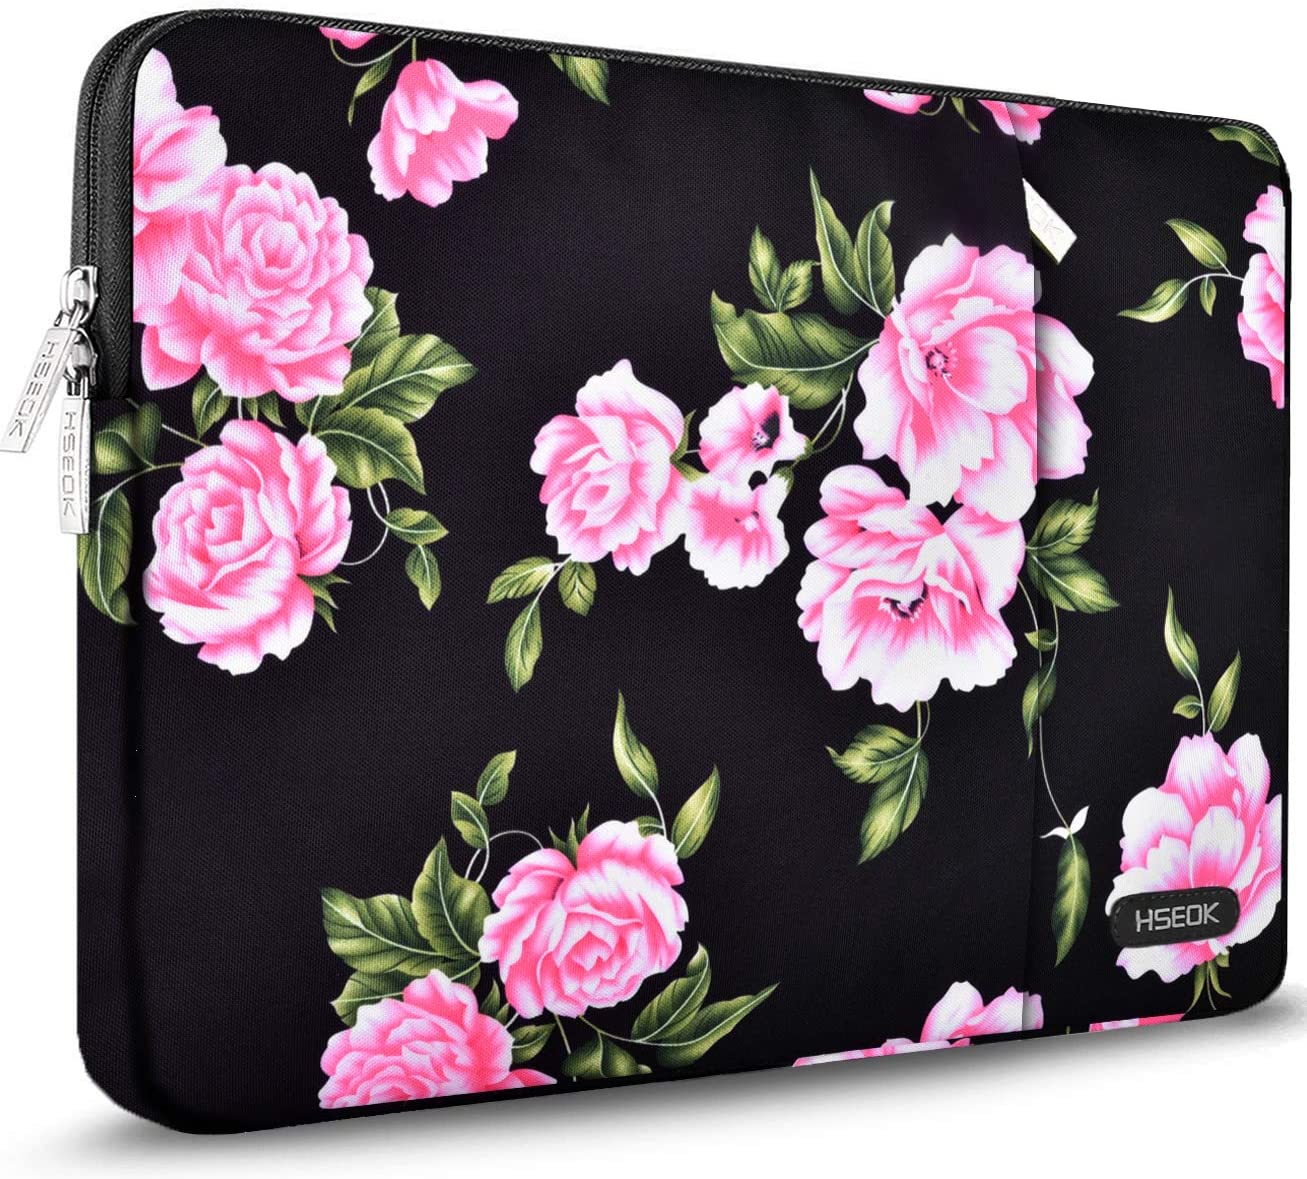 Laptop Case 13.3 14 15 15.6 16 Inch Sleeve Water Resistant Cover for MacBook Pro Air and Most Popular 13-16 inch Notebooks